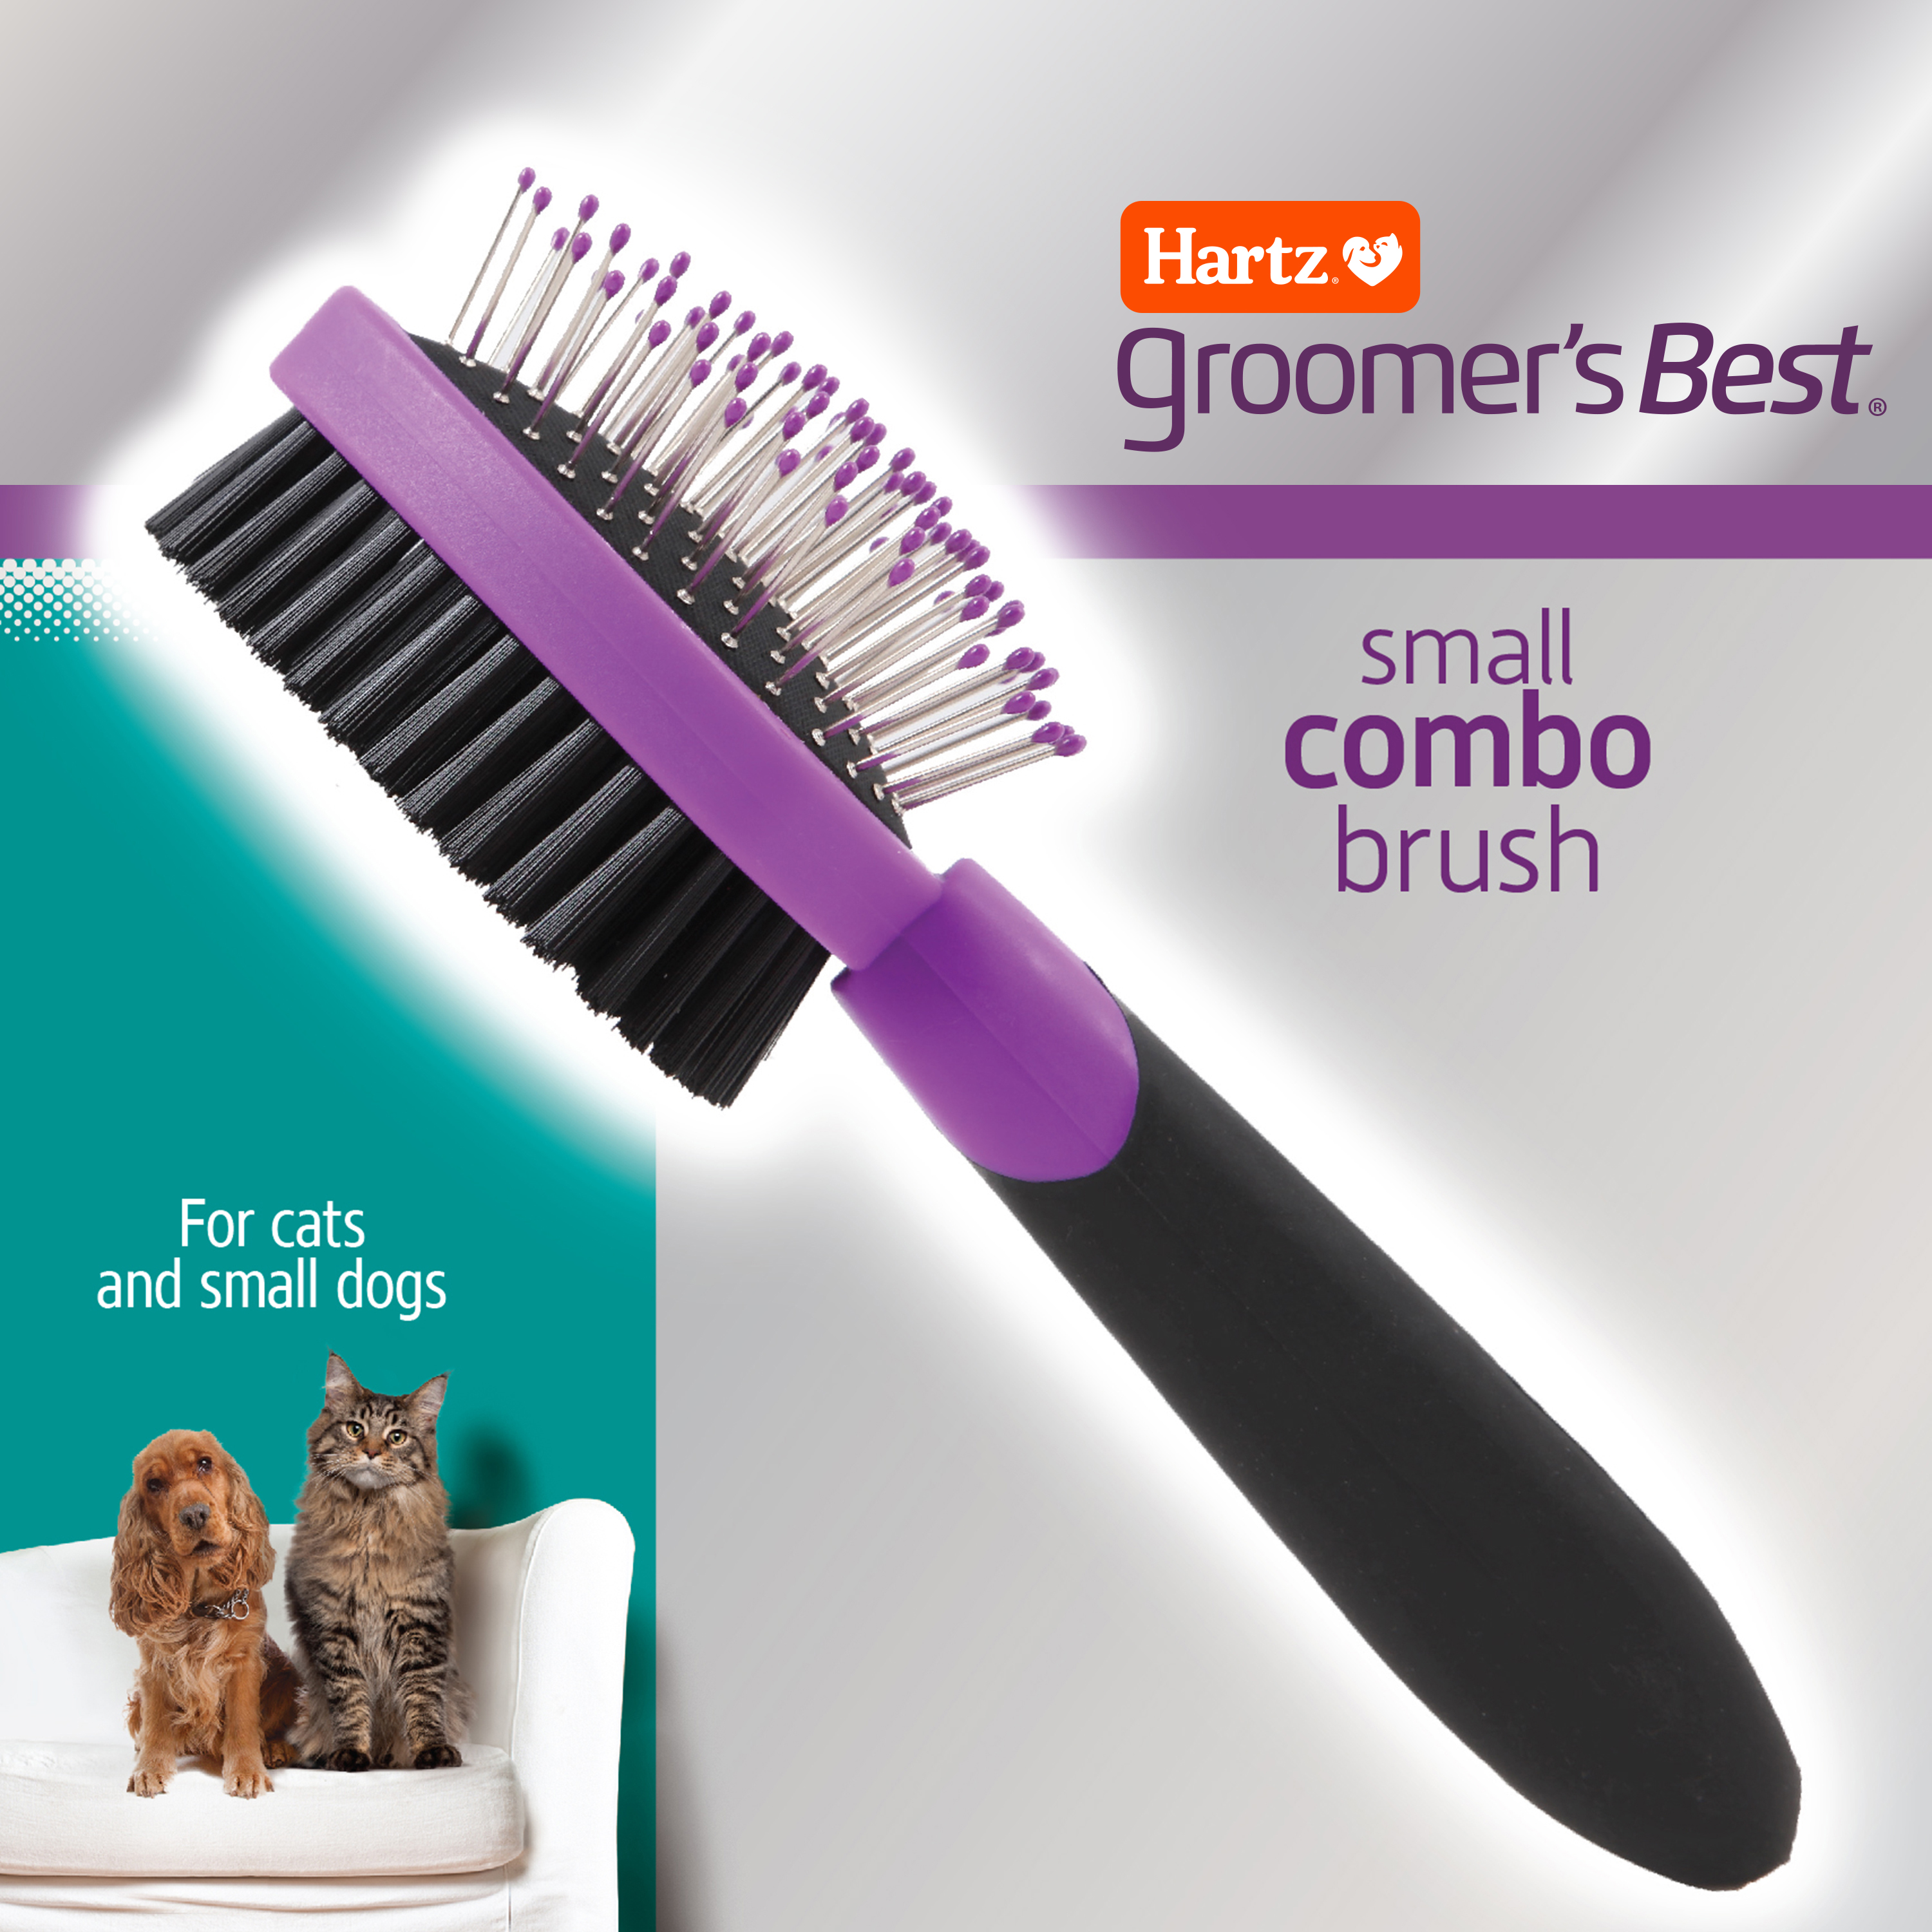 Hartz Groomer's Best Combo Grooming Brush for Cats and Small Dogs - image 3 of 8